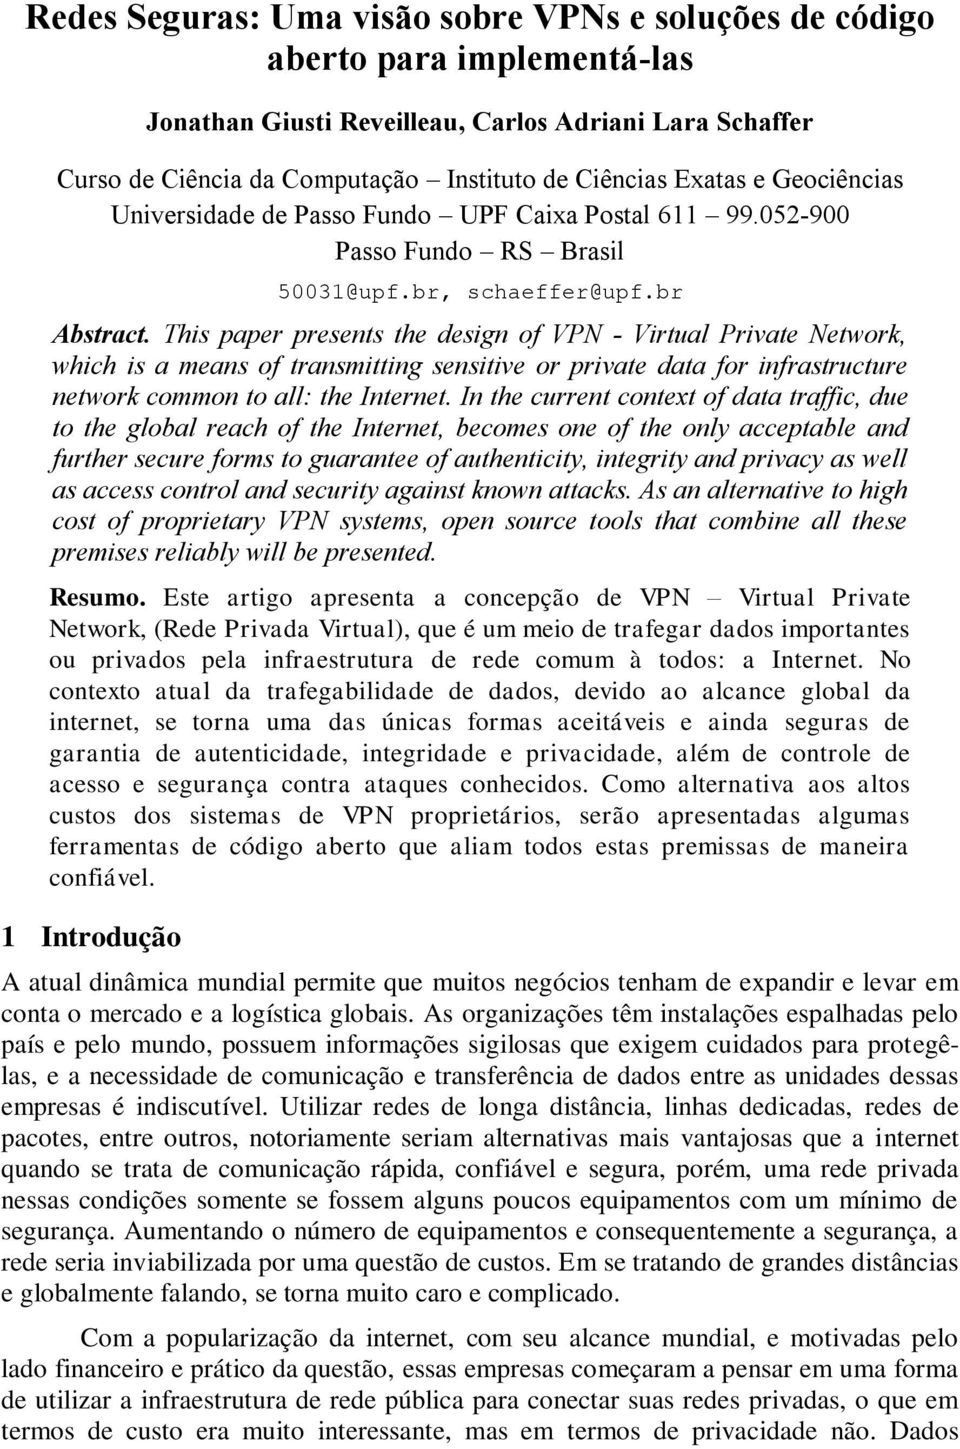 This paper presents the design of VPN - Virtual Private Network, which is a means of transmitting sensitive or private data for infrastructure network common to all: the Internet.